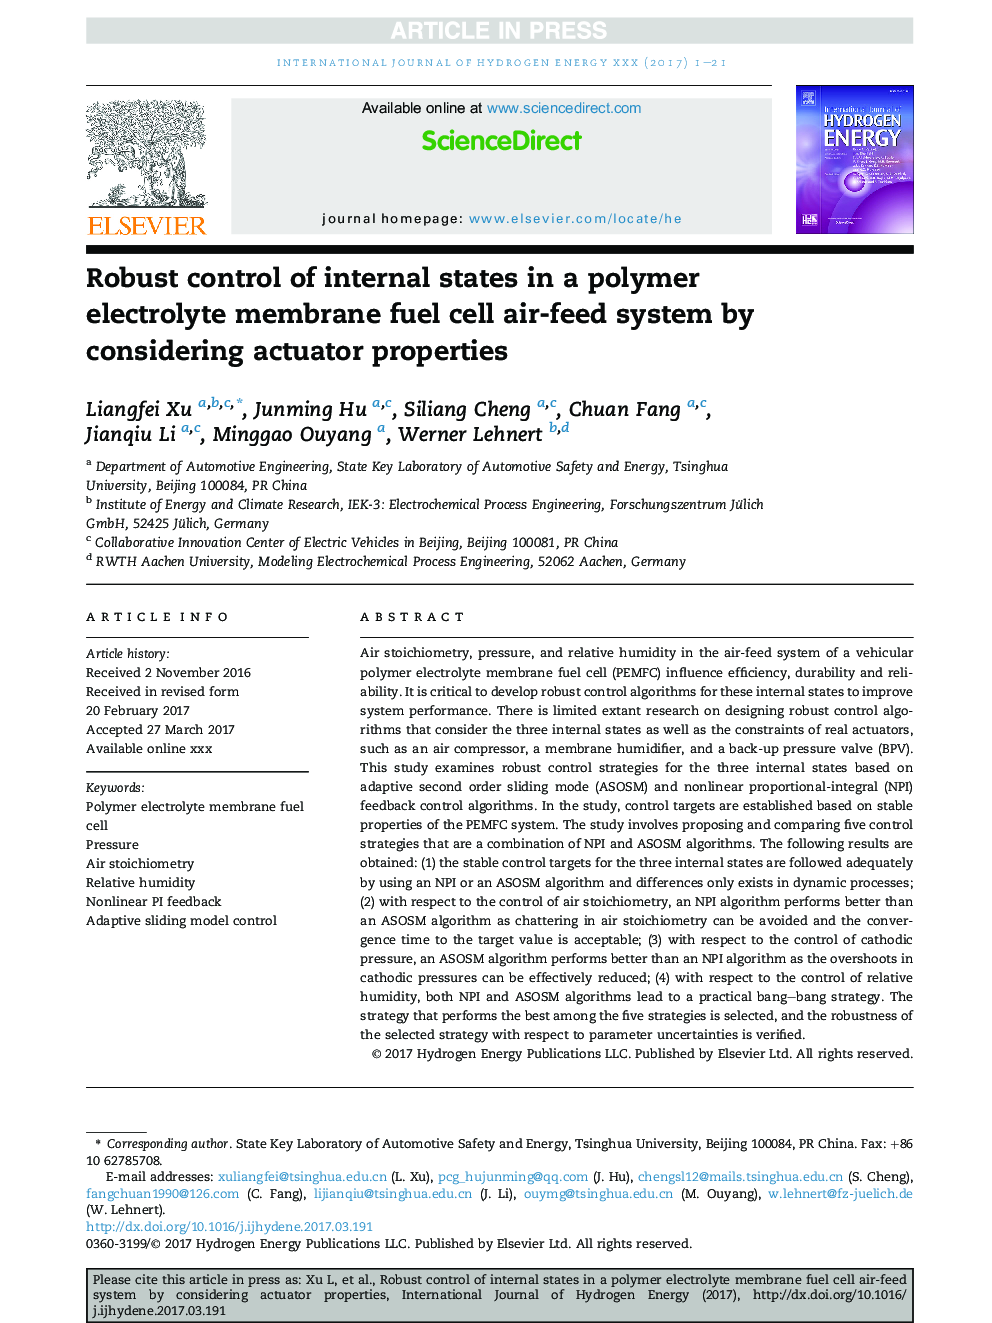 Robust control of internal states in a polymer electrolyte membrane fuel cell air-feed system by considering actuator properties